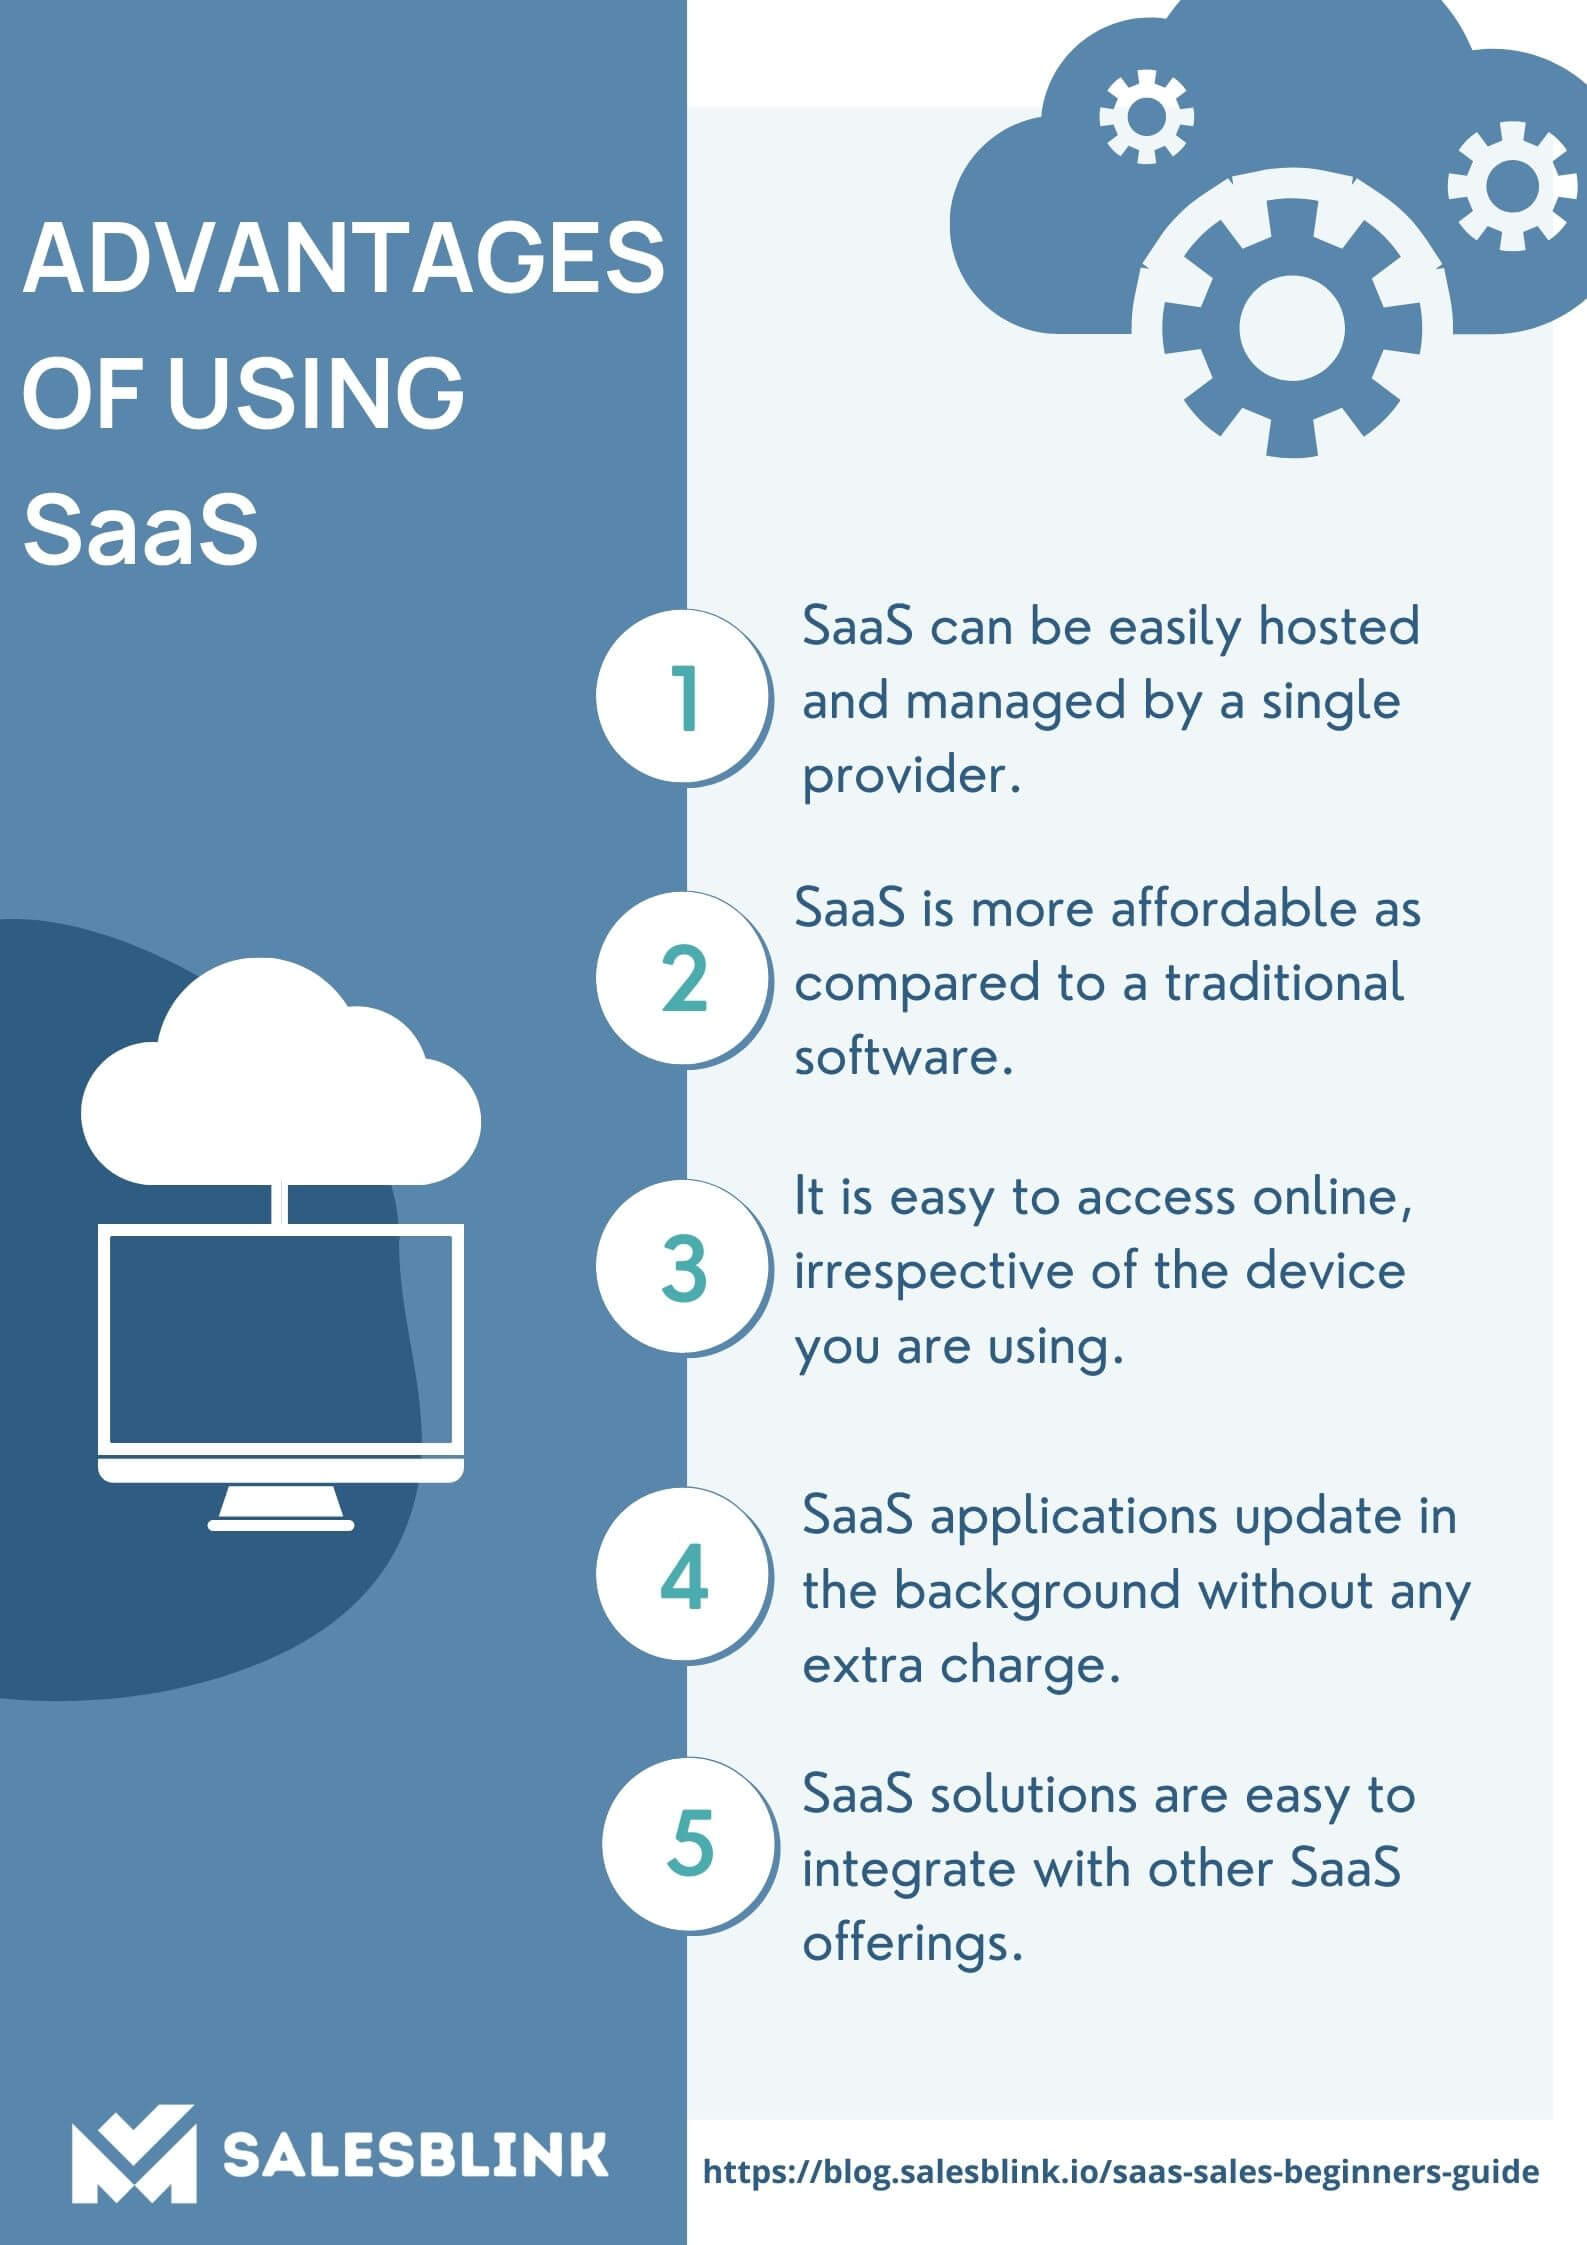 Advantages of using SaaS